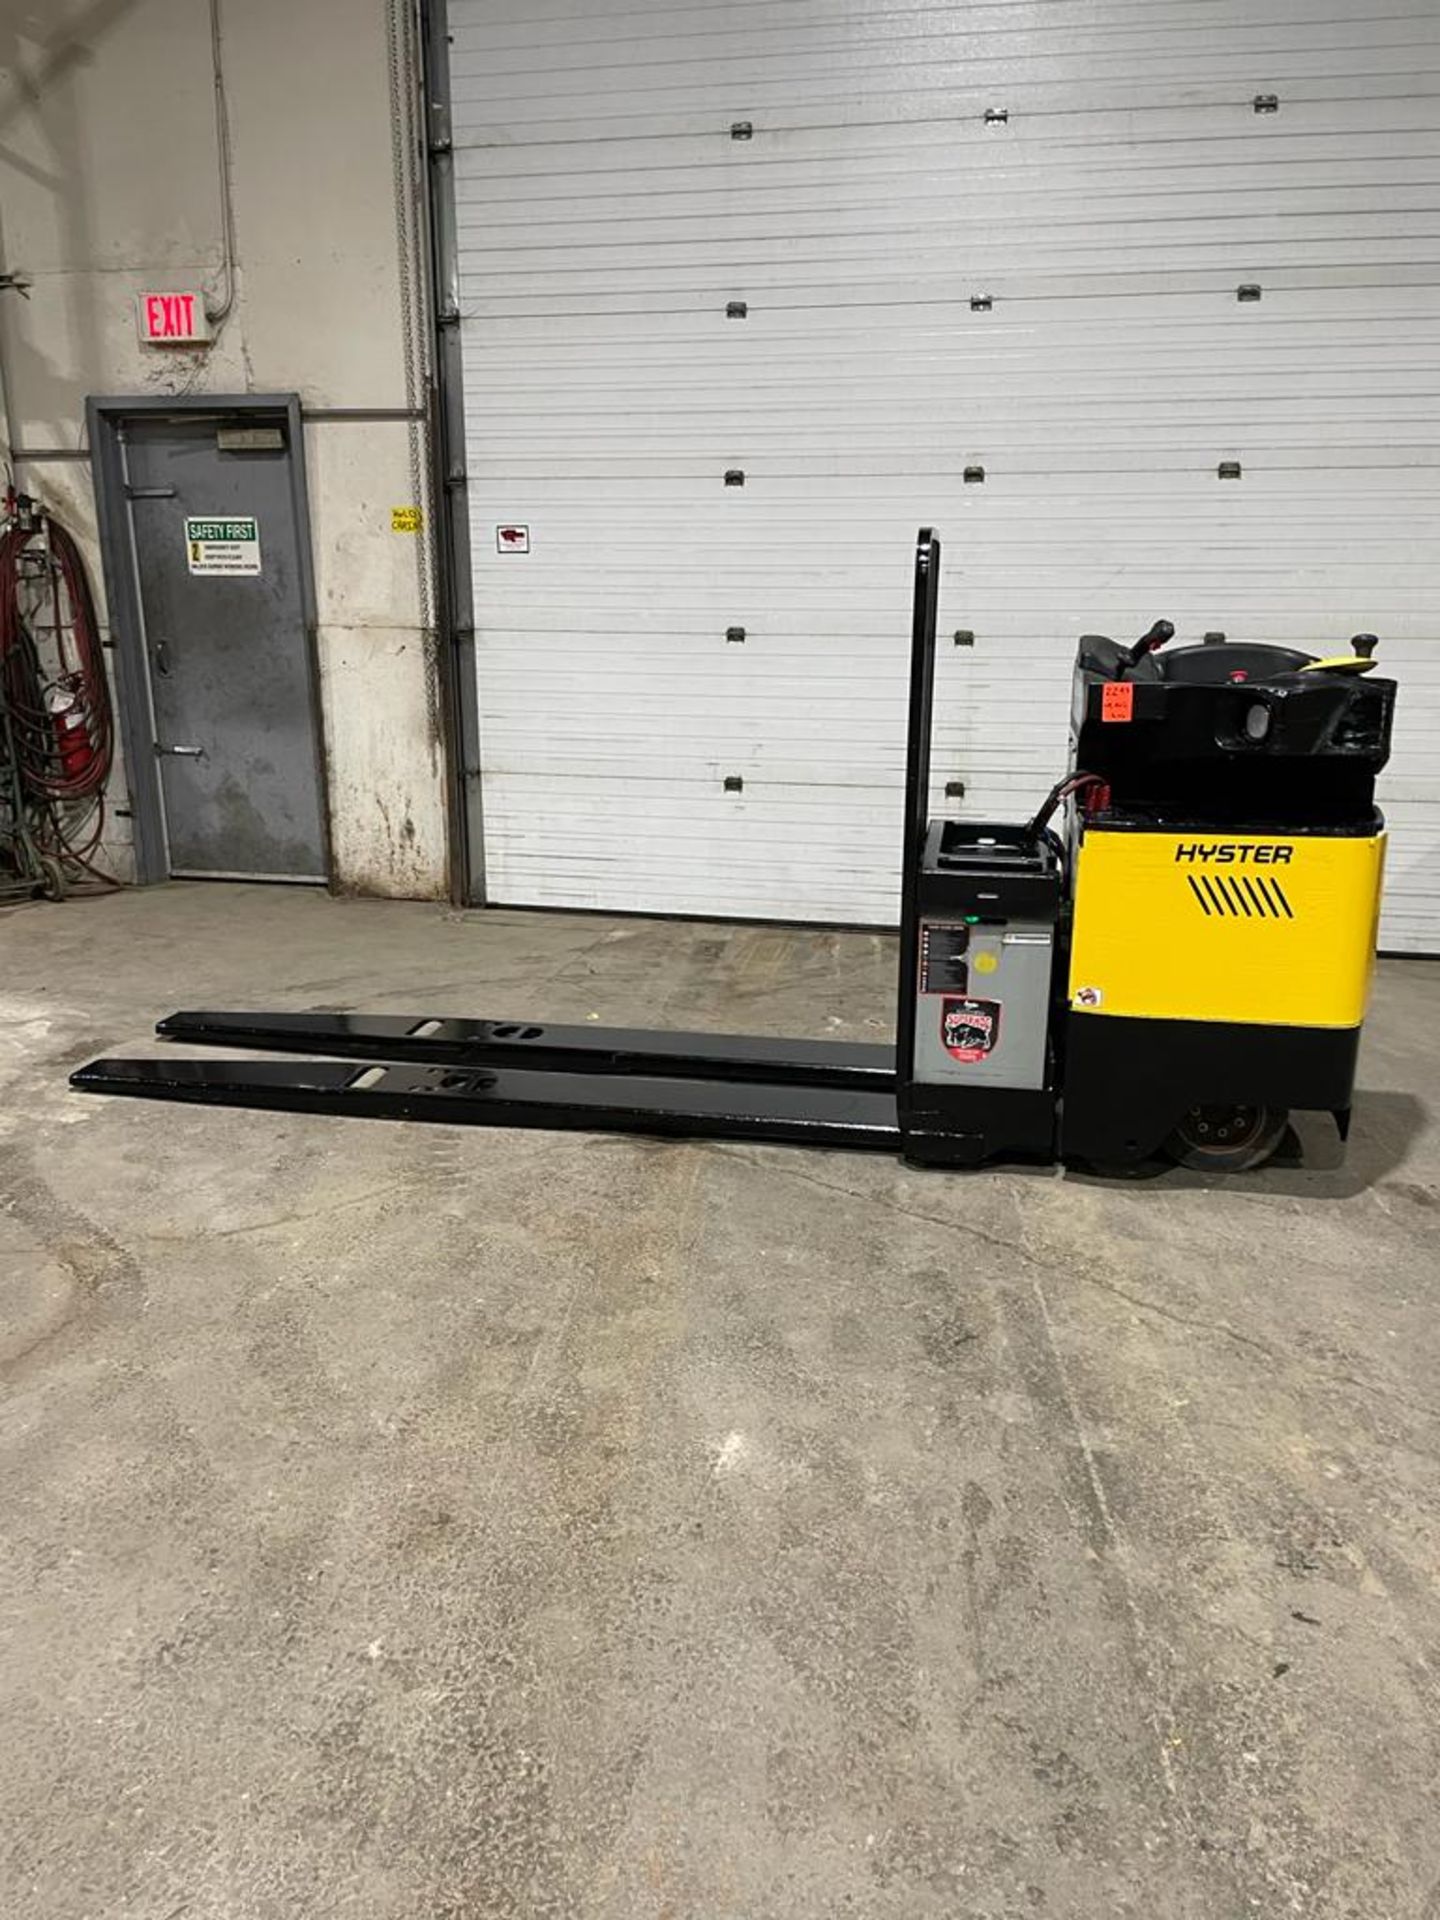 NICE 2015 Hyster Ride-On END RIDER Powered Pallet Truck 8' Long Forks 8000lbs capacity - 24V NICE